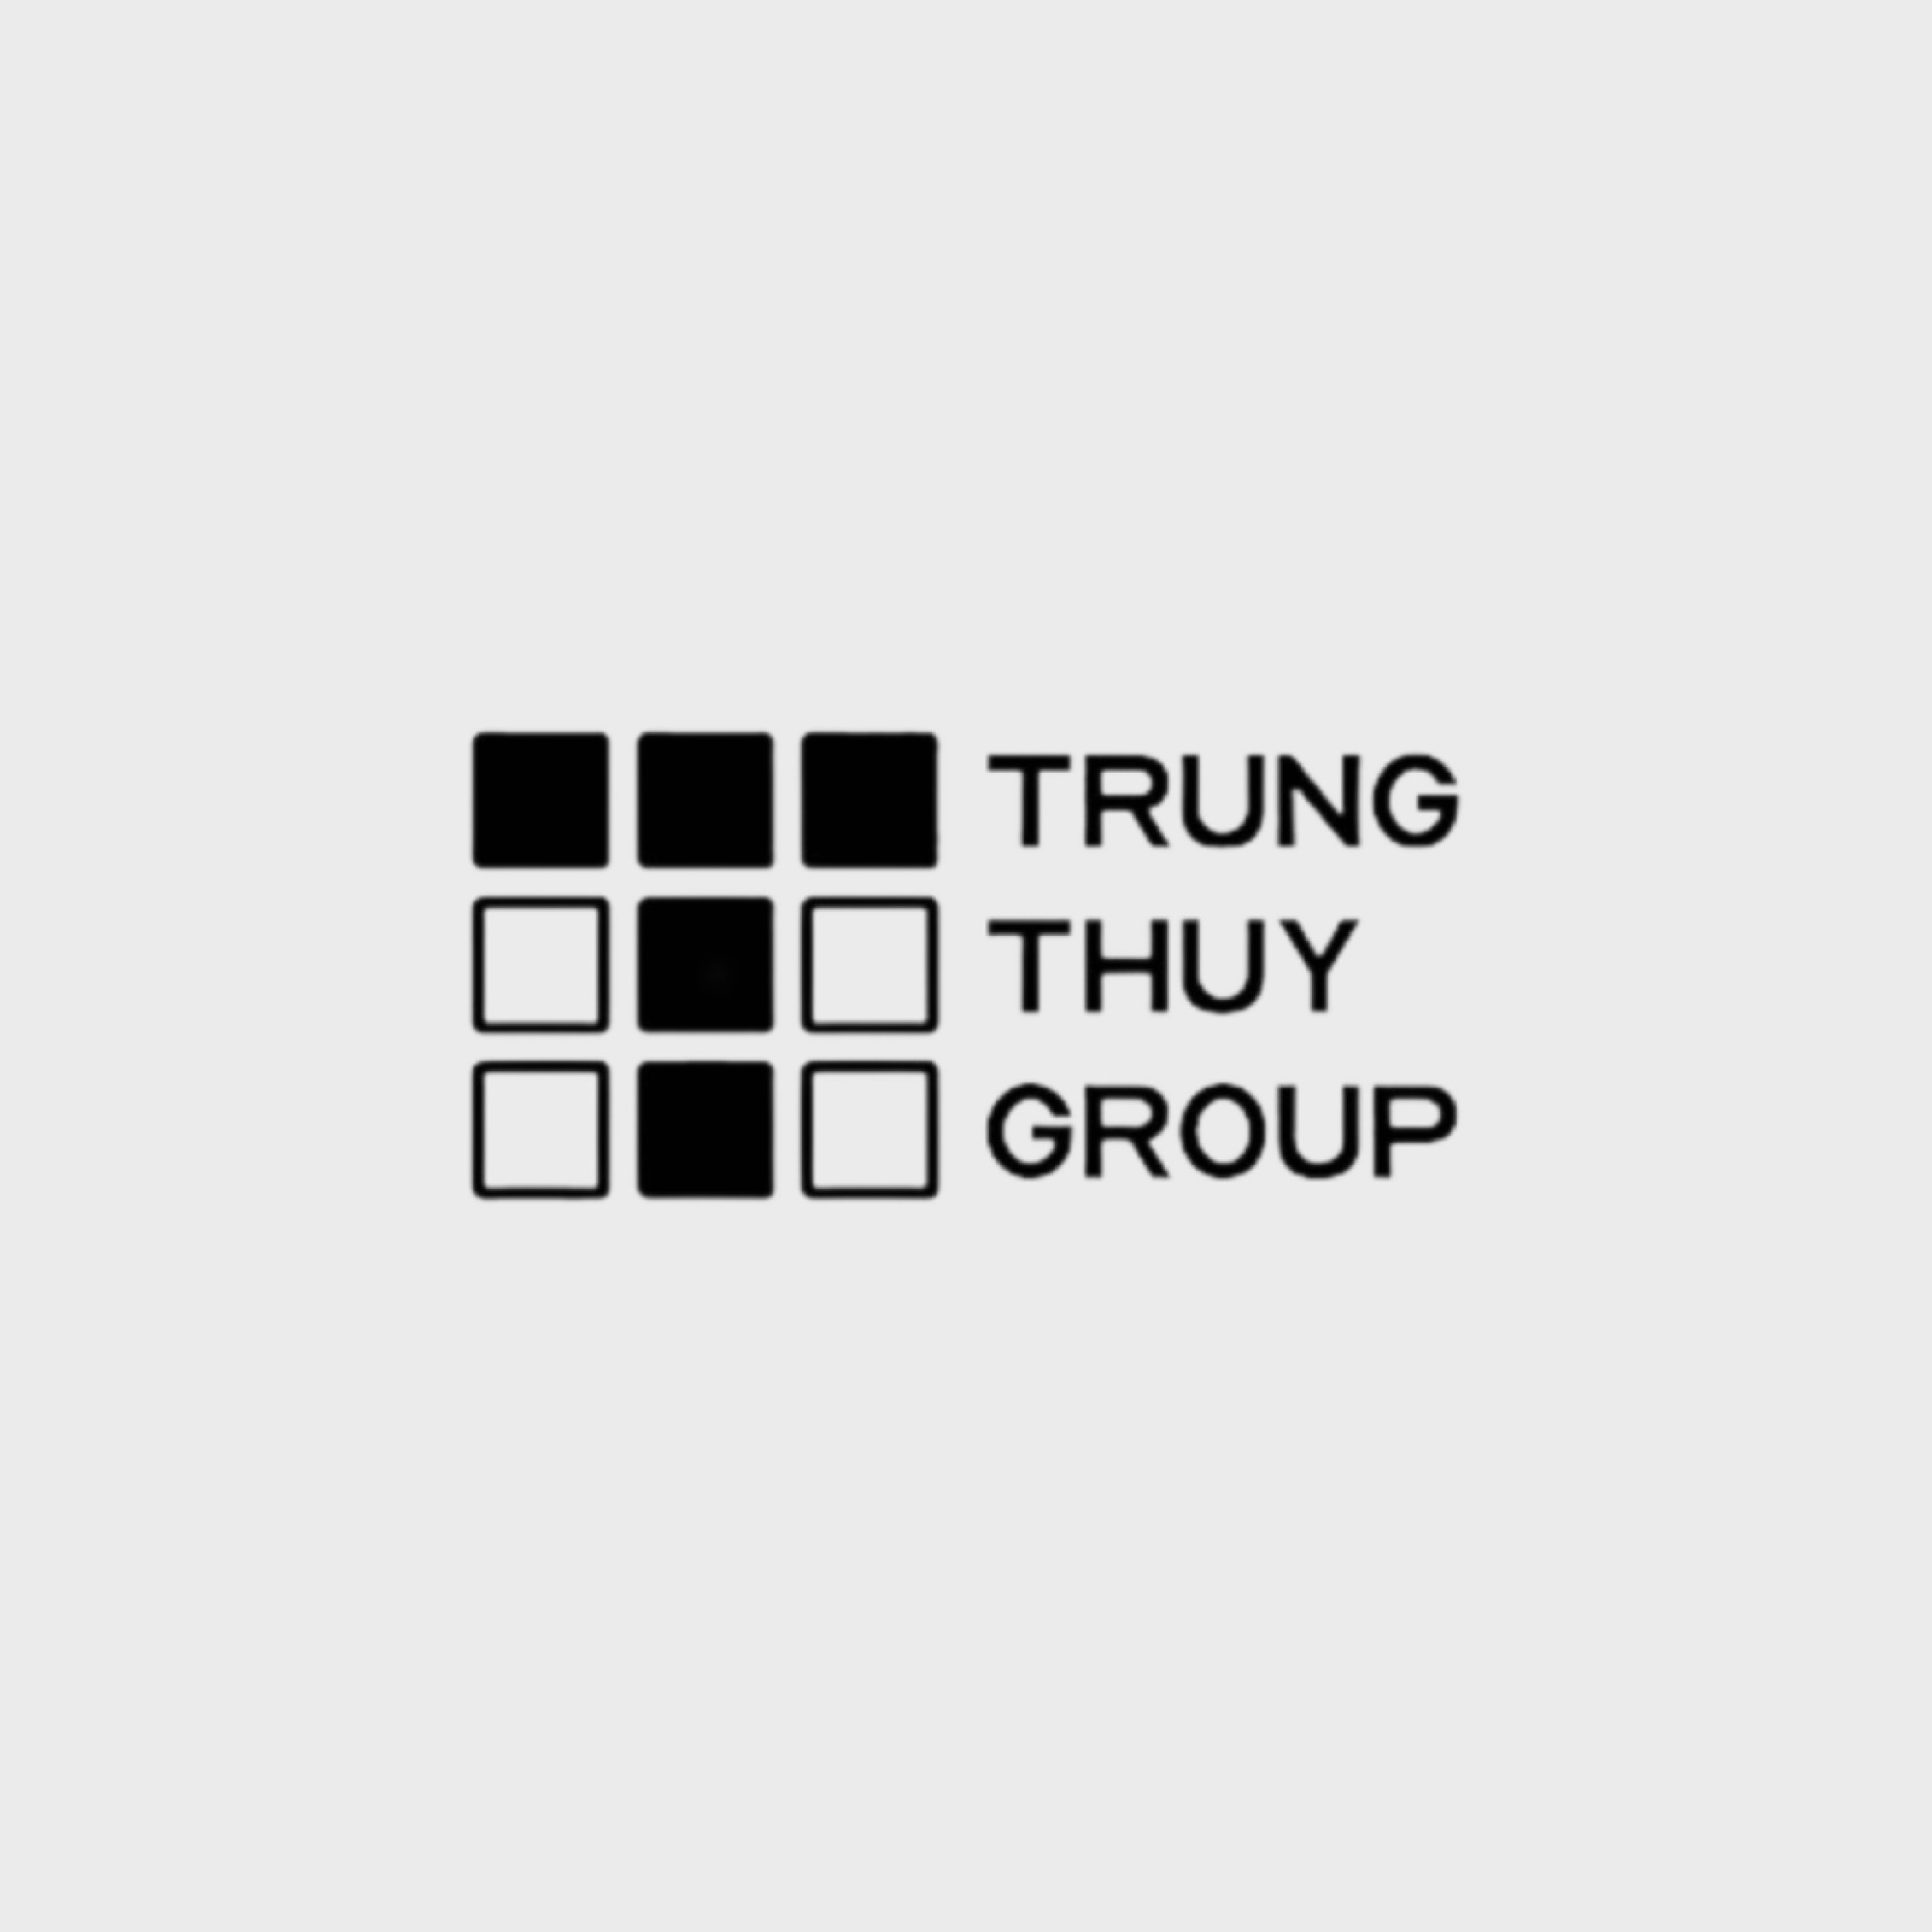 TRUNG THUY GROUP